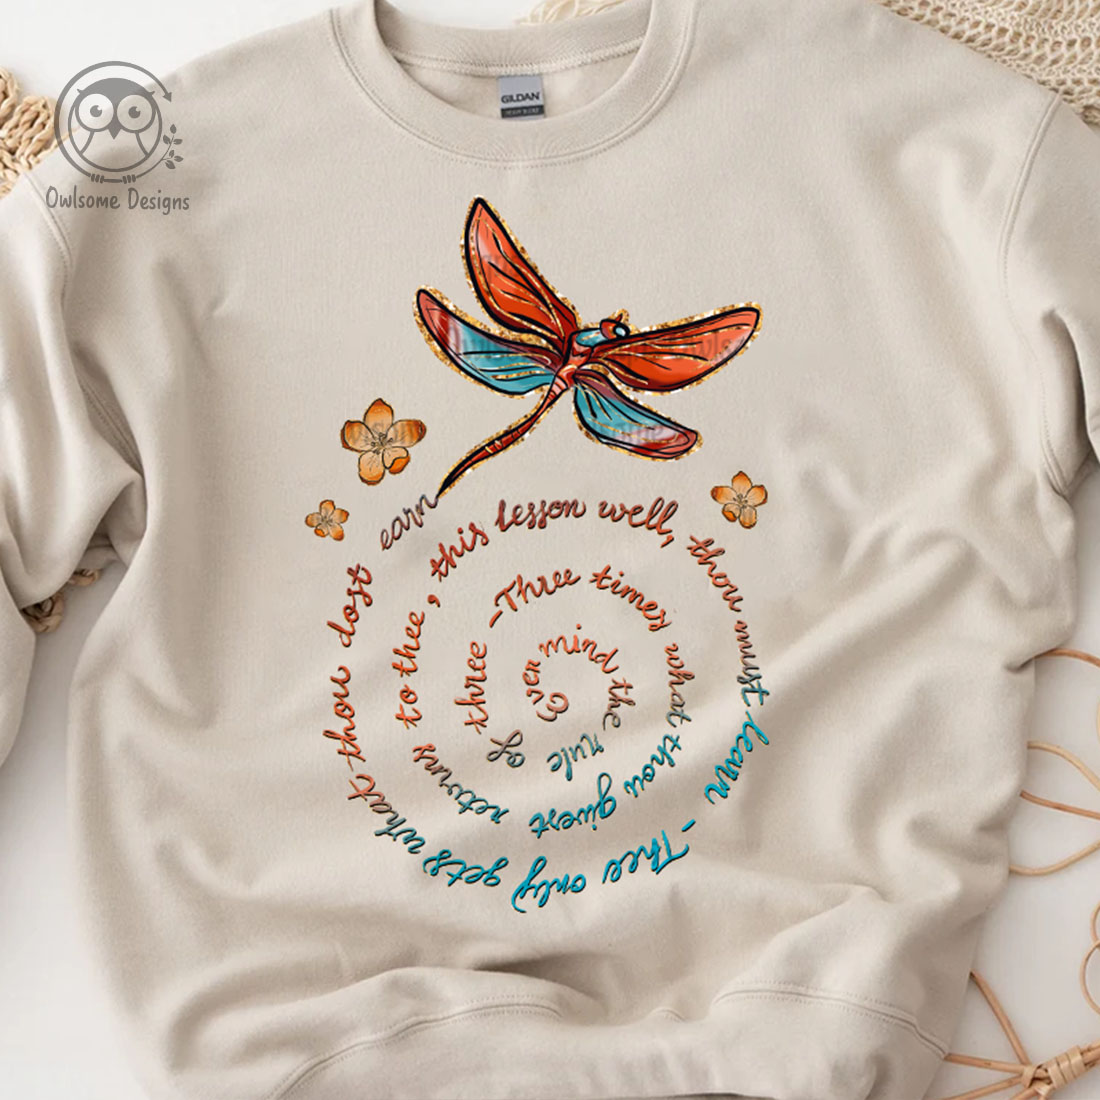 Image of sweatshirt with irresistible dragonfly print.